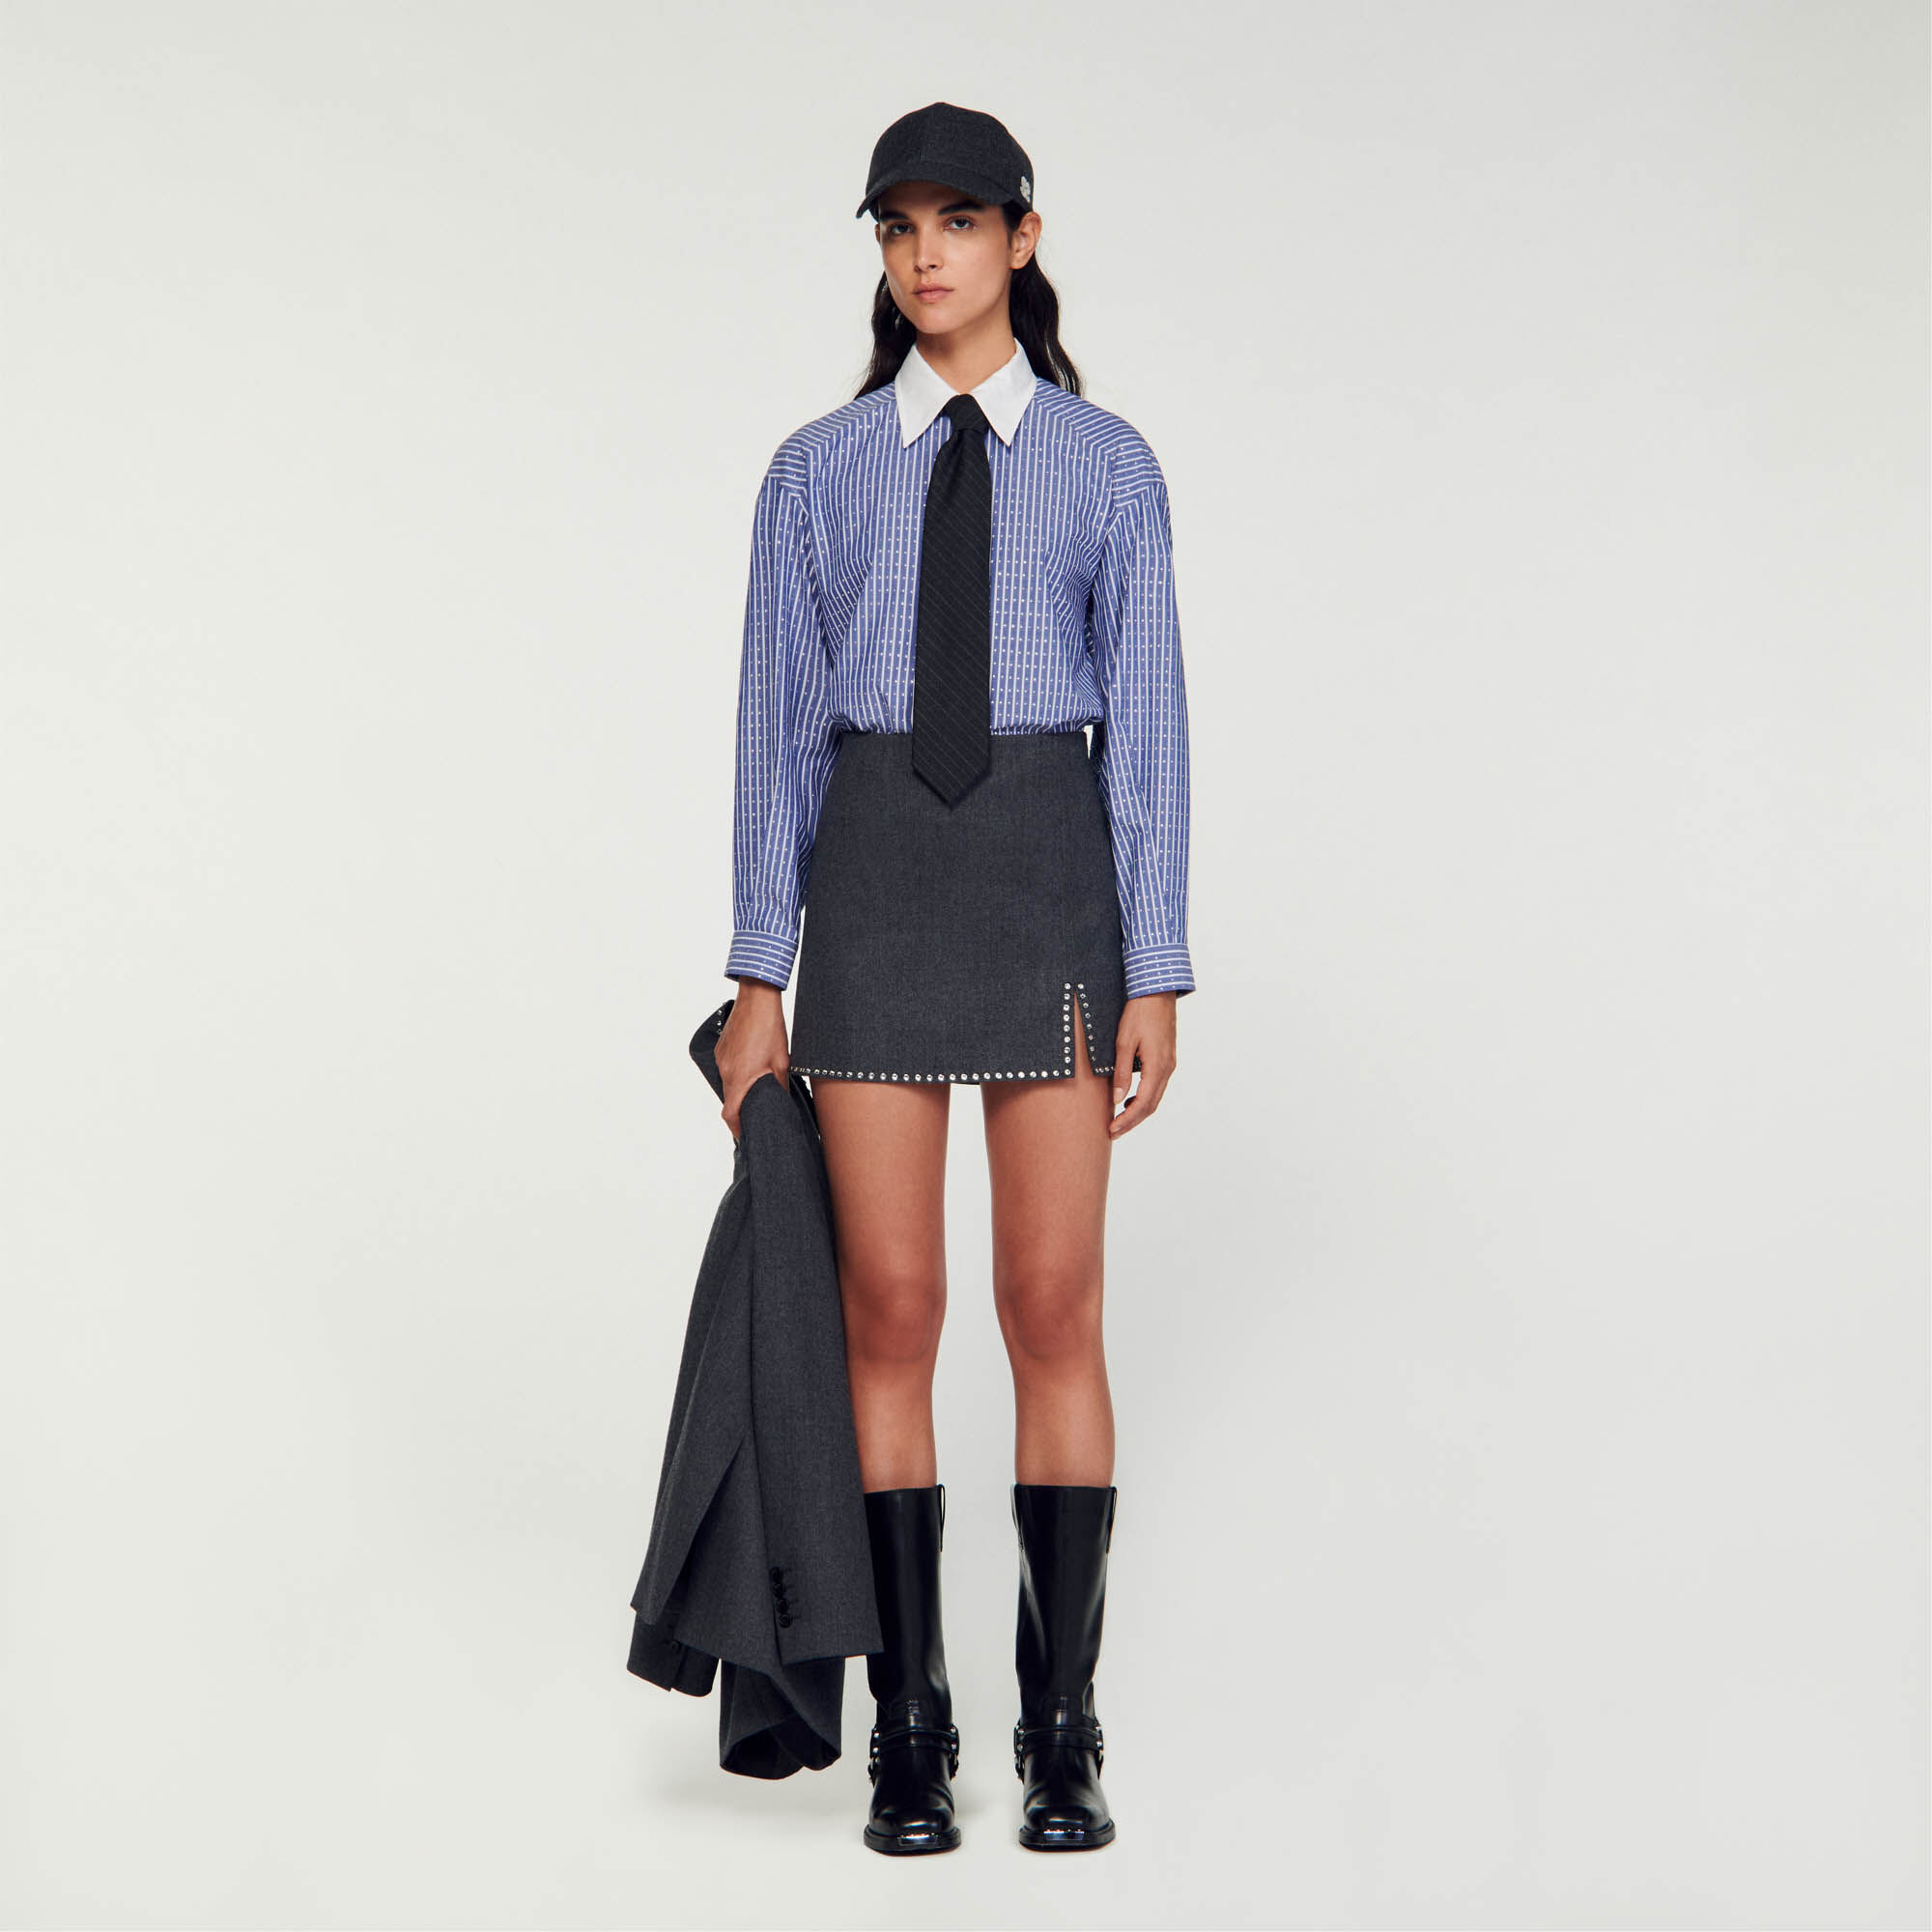 Women's Tops & Shirts - New Collection | Sandro